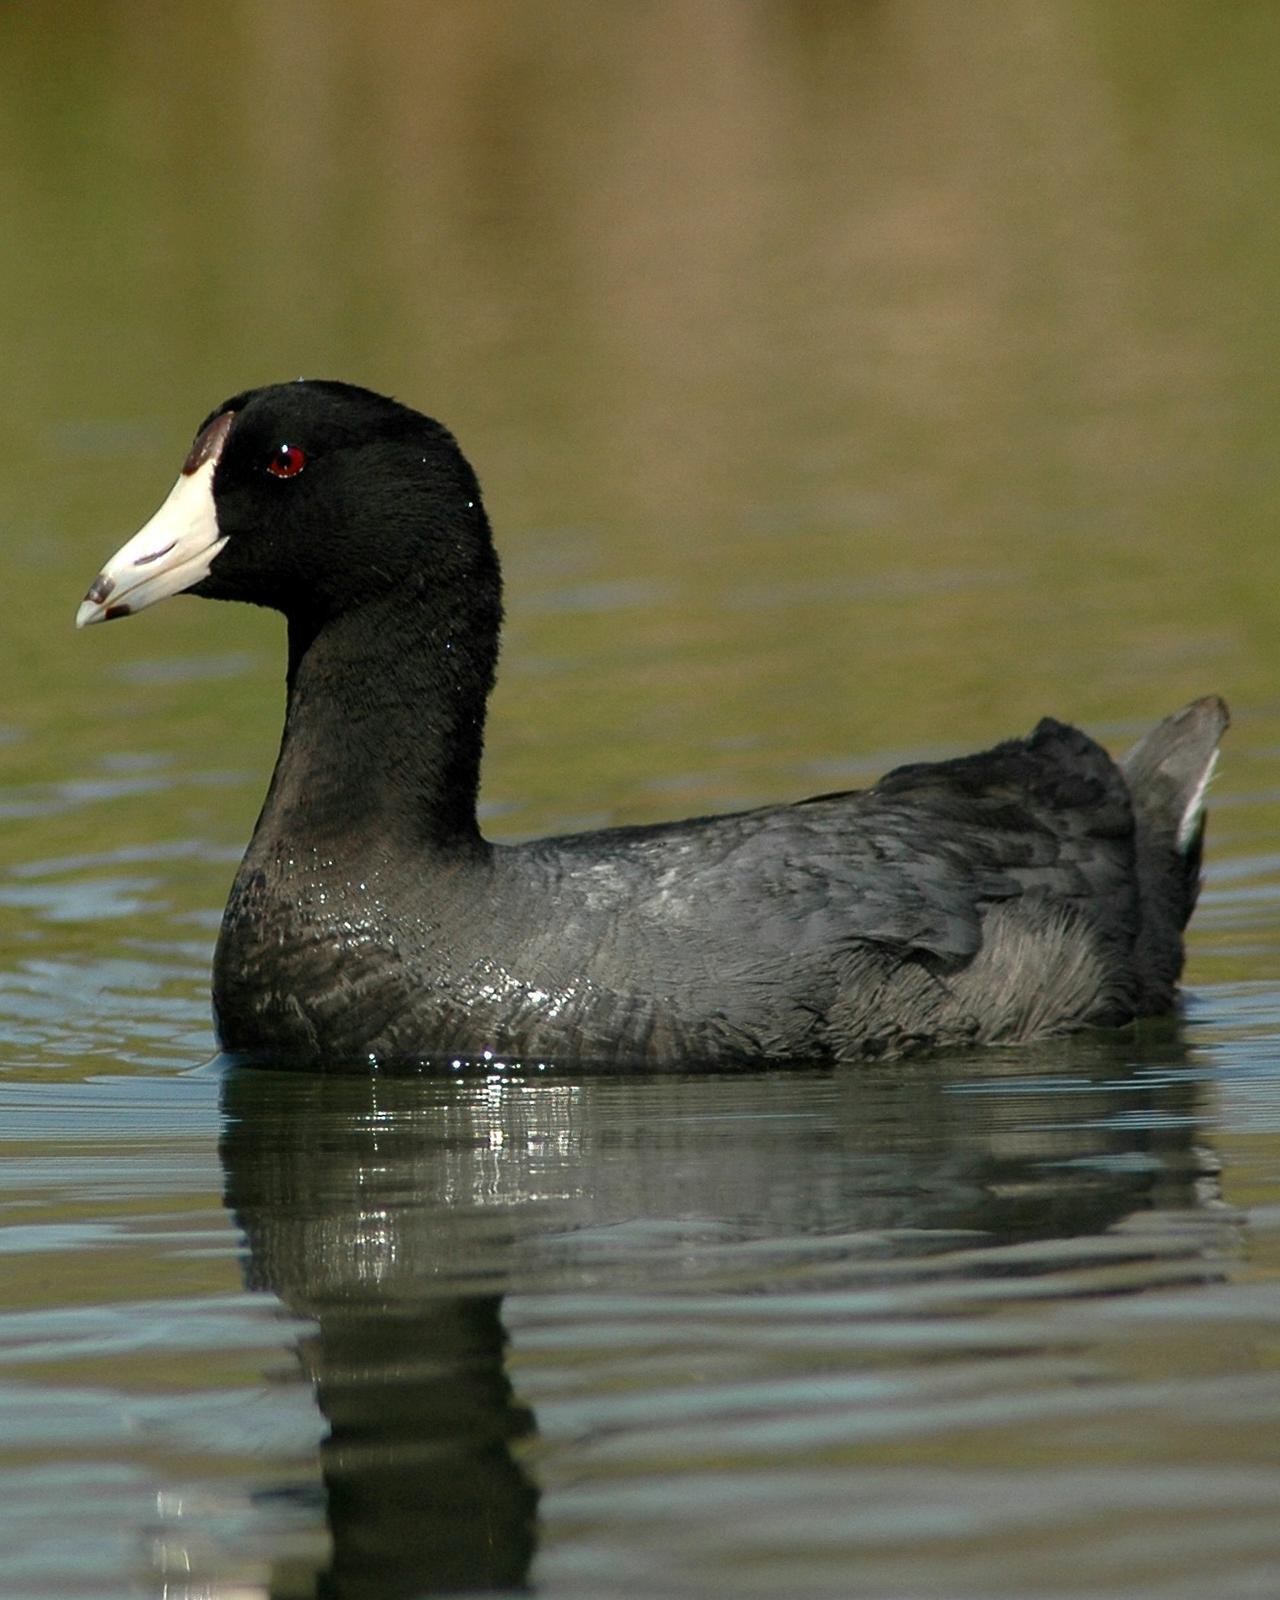 American Coot Photo by David Hollie